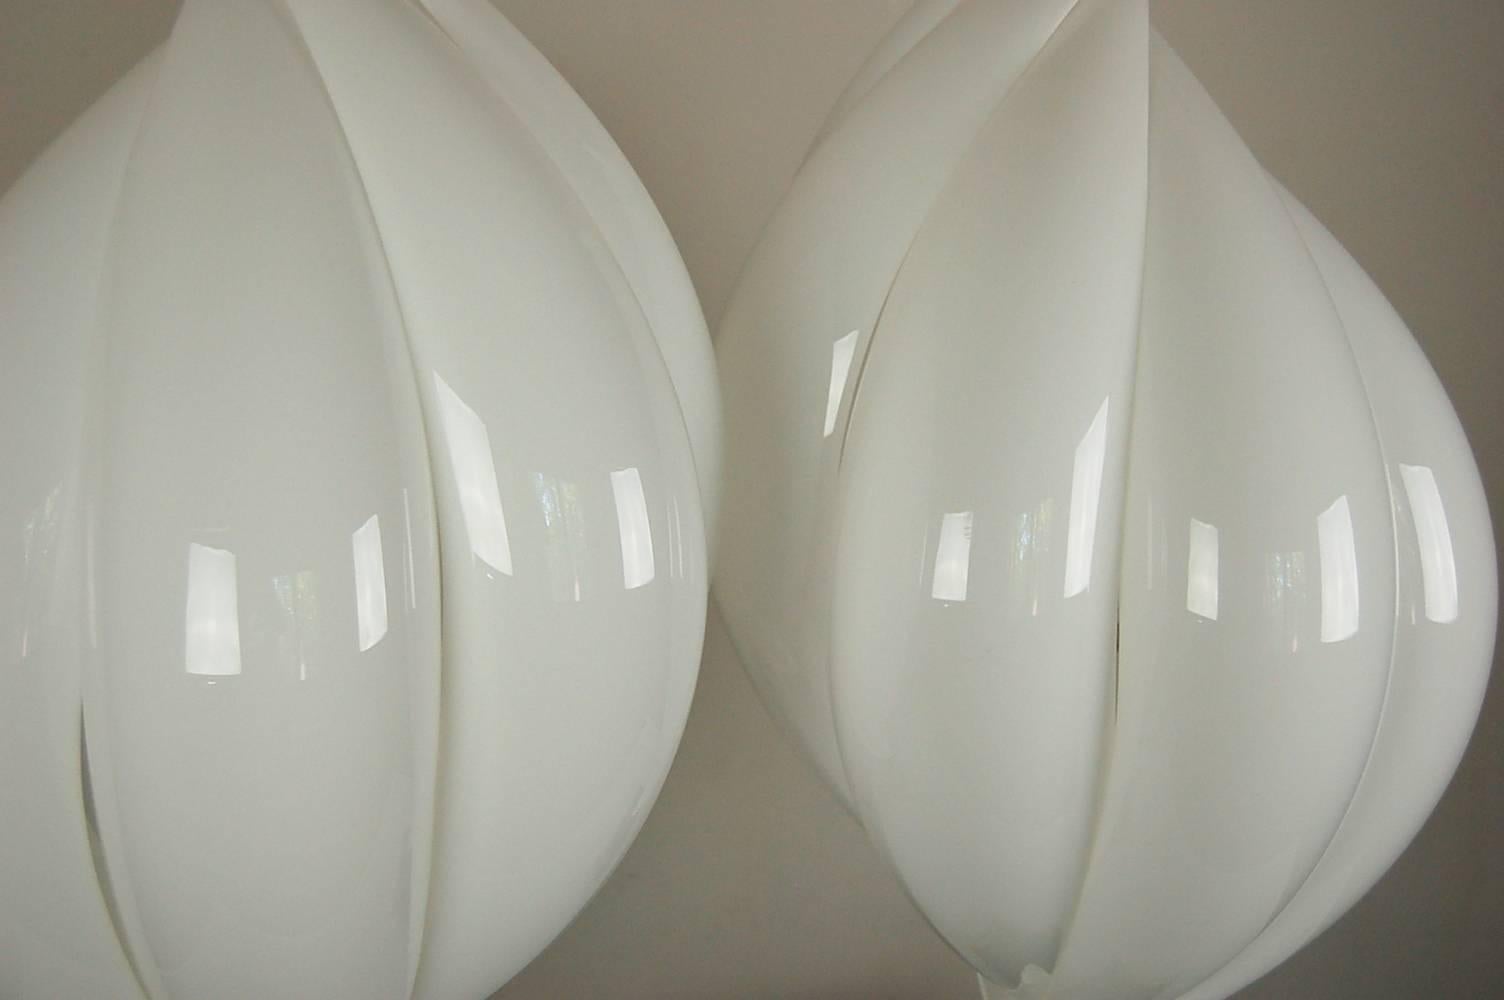 Matched Pair of Acrylic Petal Table Lamps by Rougier, 1970's For Sale 2